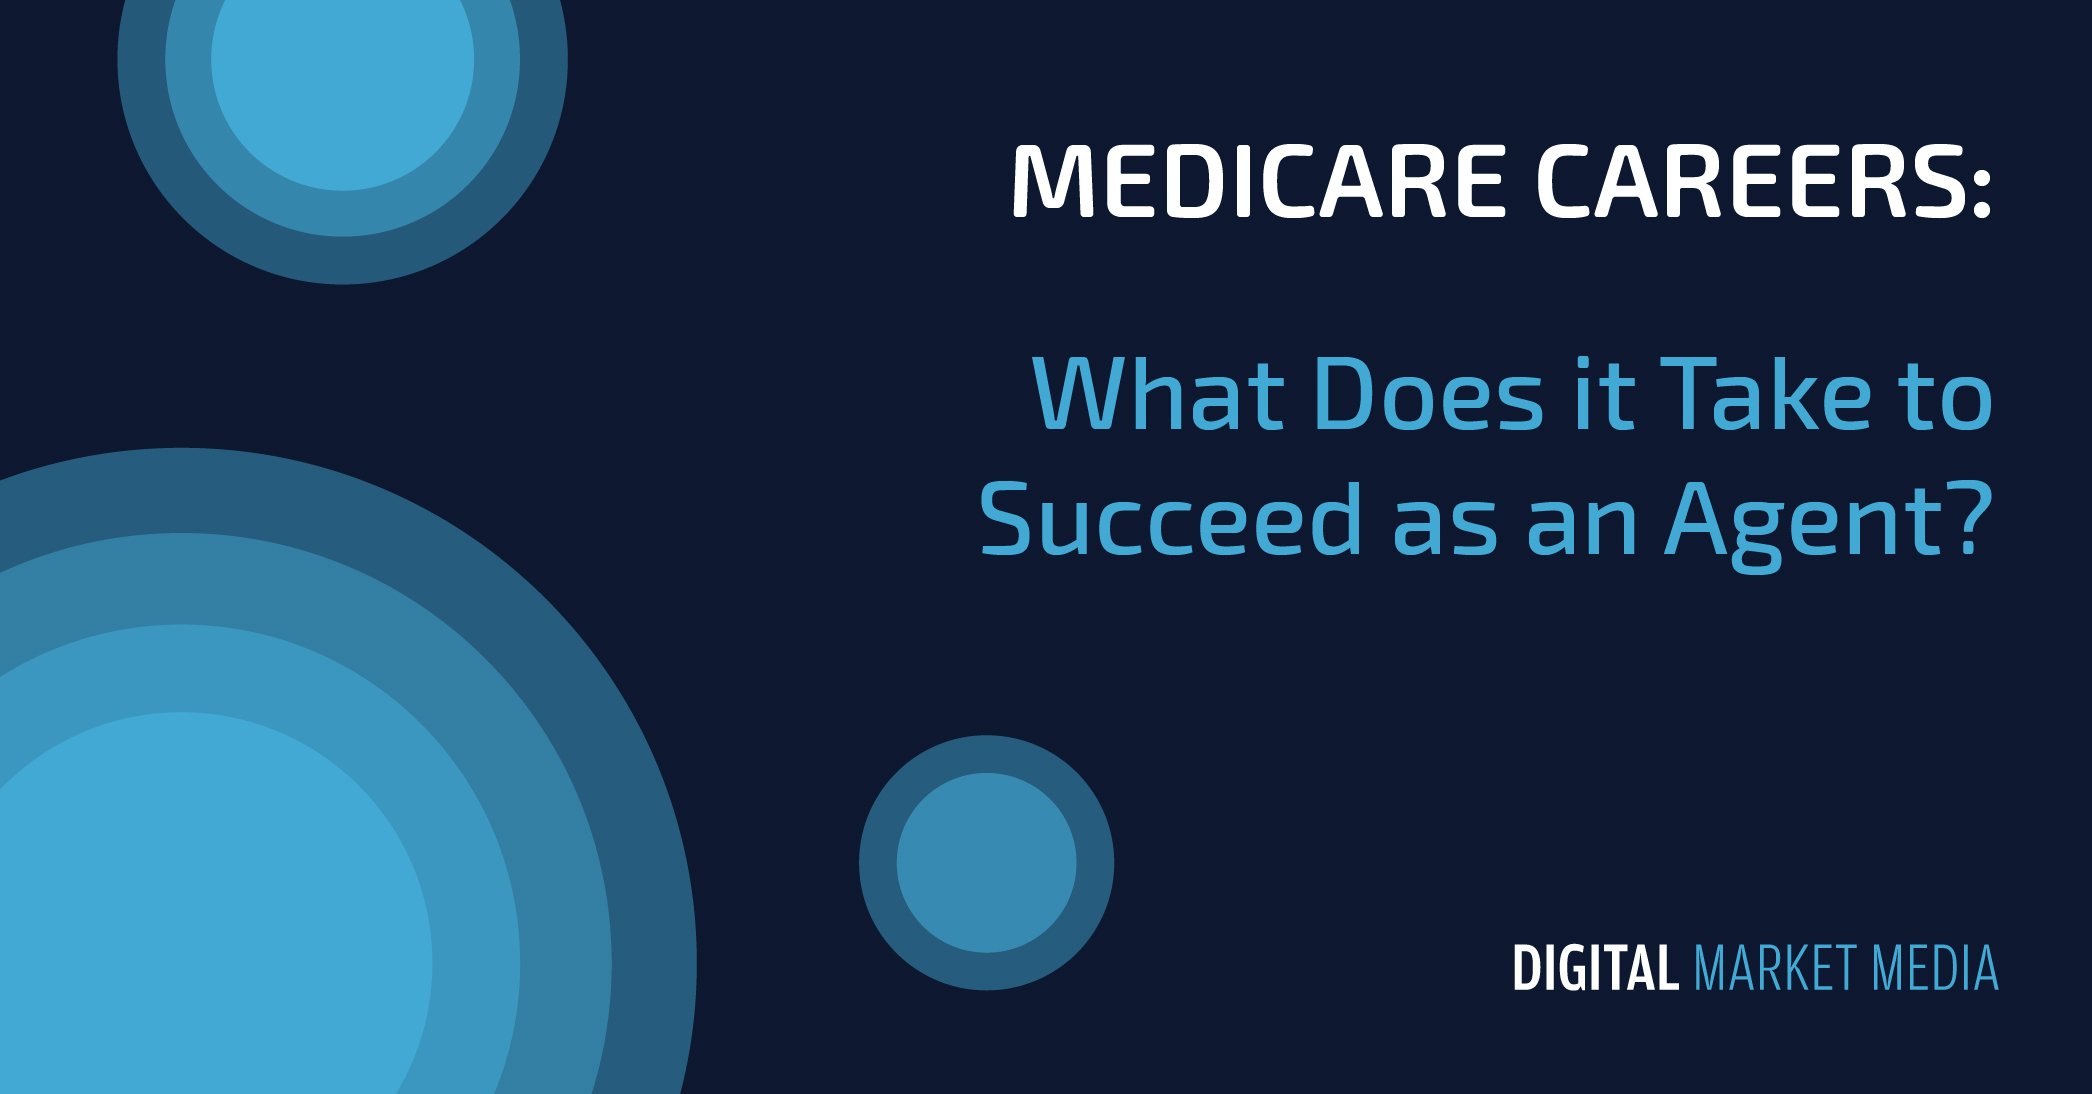 Medicare Careers: What Does it Take to Succeed as an Agent?